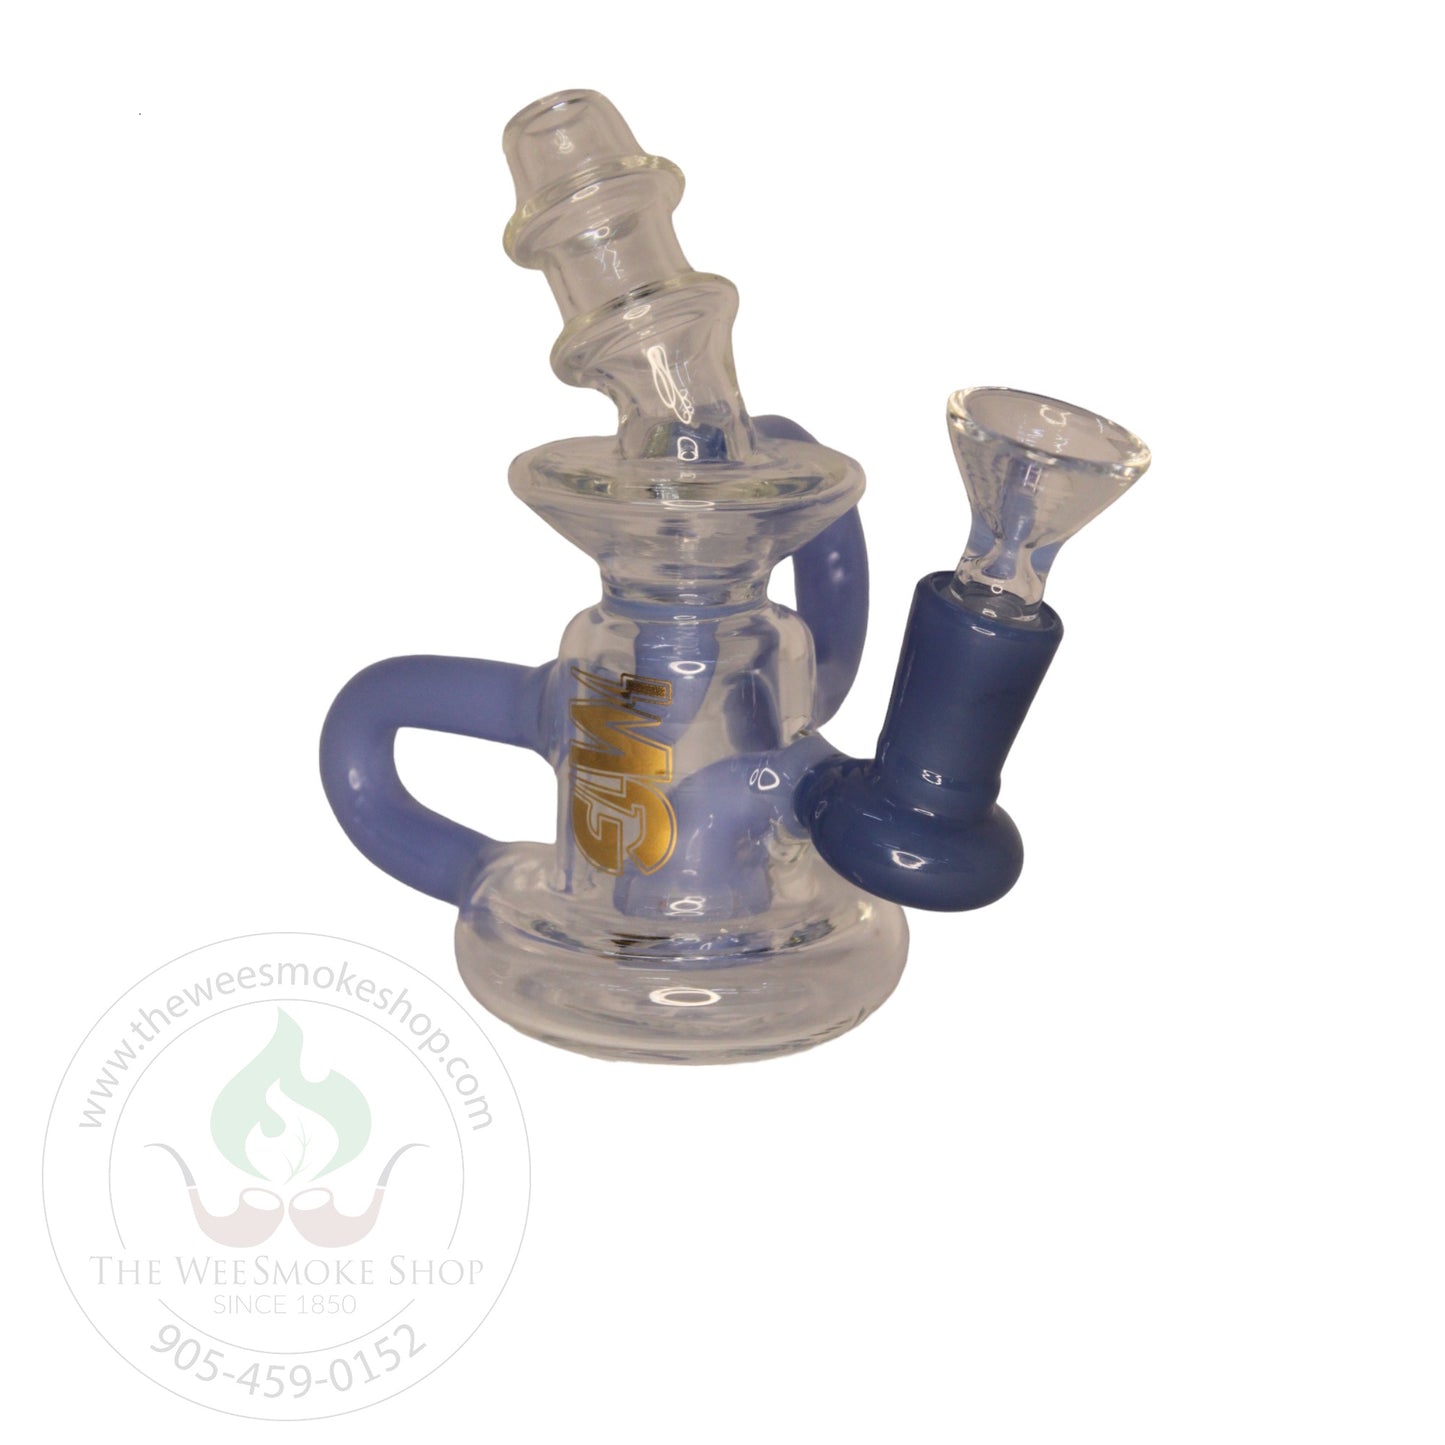 Make Glass Recycler Rig (6") - The Wee Smoke Shop